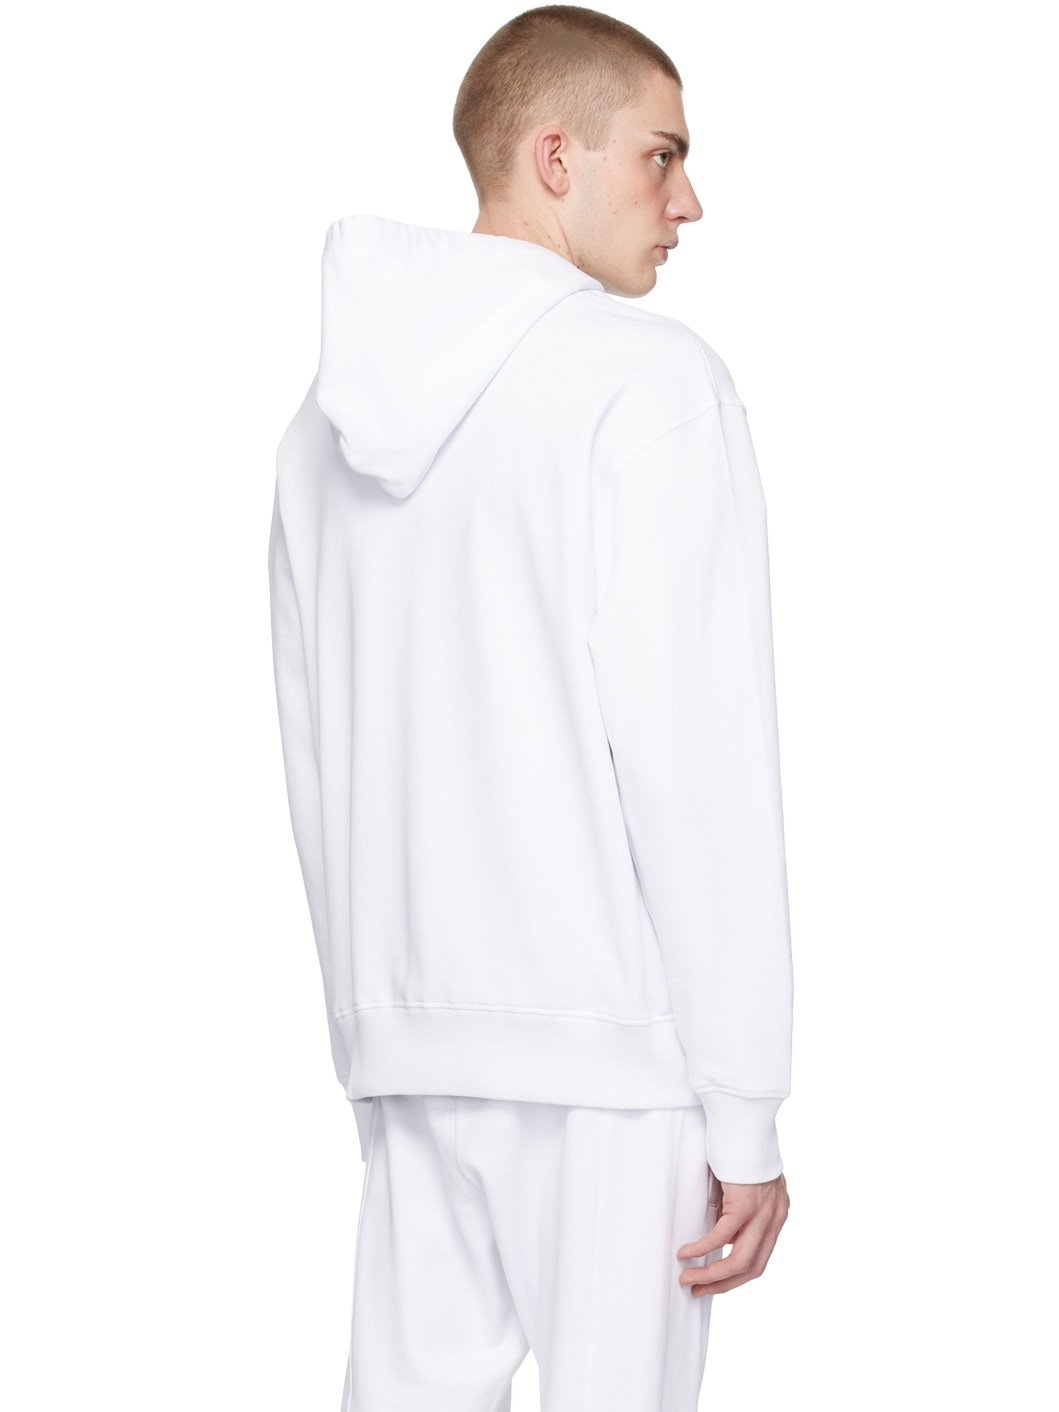 White Embroidered Hoodie - 3